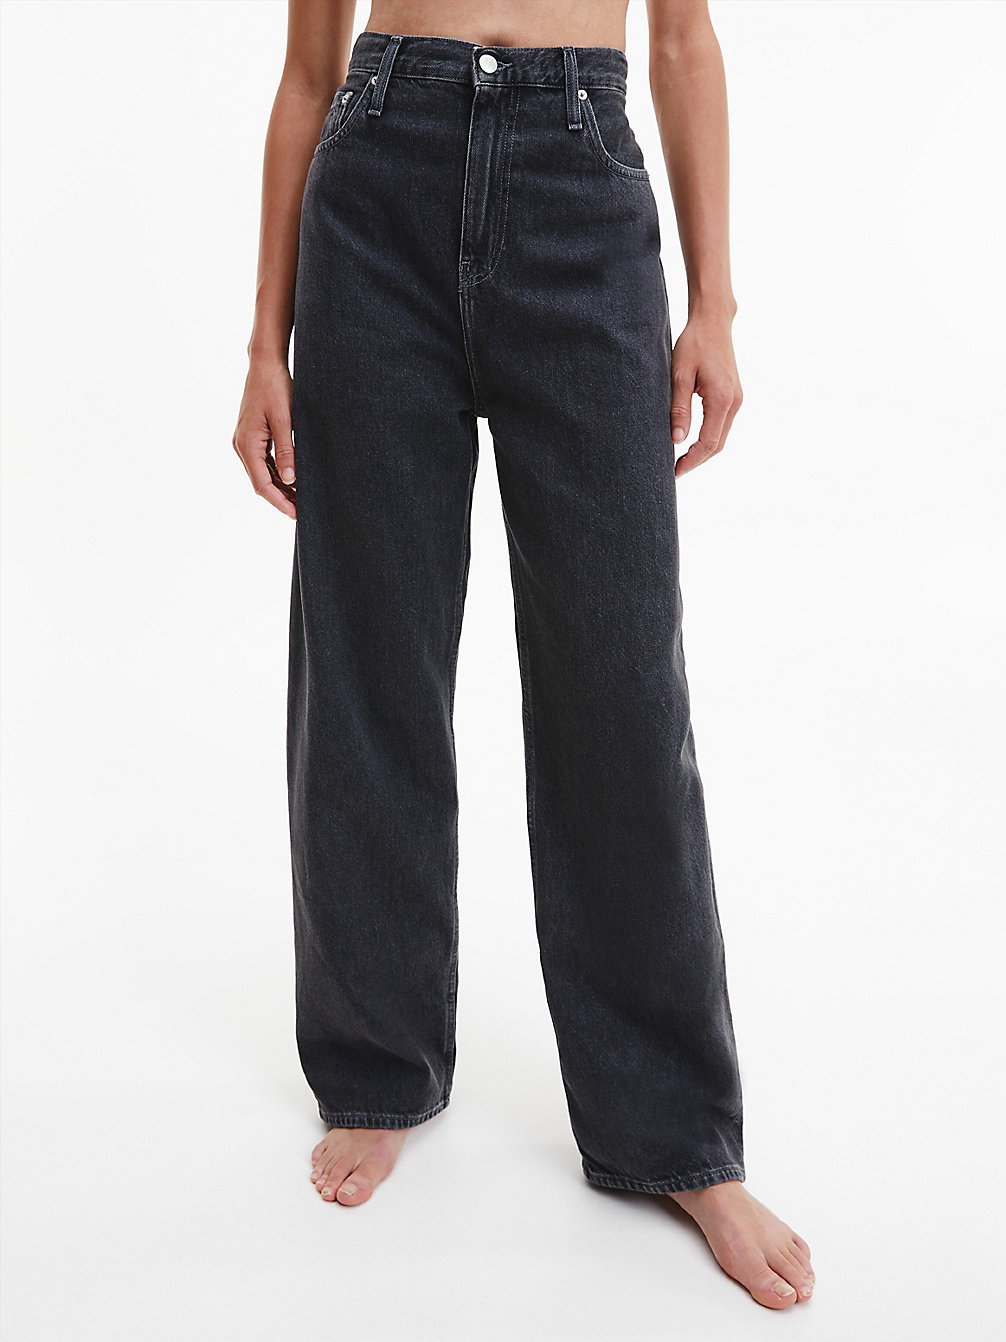 High Rise Relaxed Jeans > DENIM GREY > undefined mujer > Calvin Klein